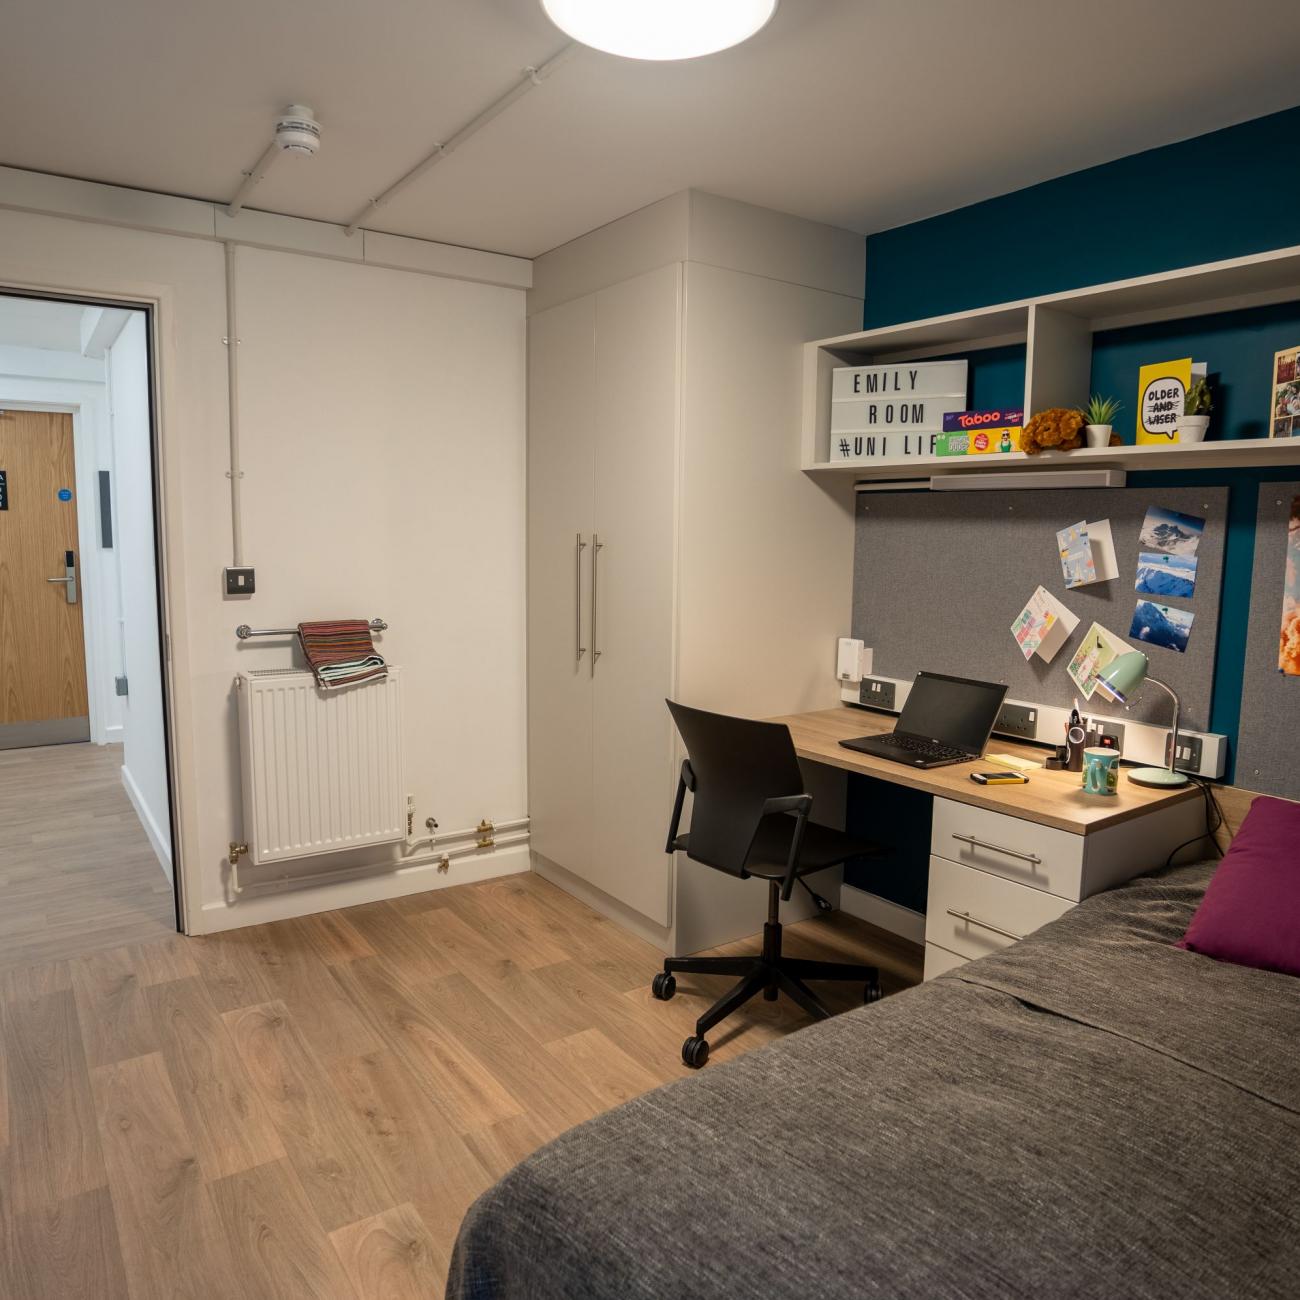 Student accommodation bedroom and hallway